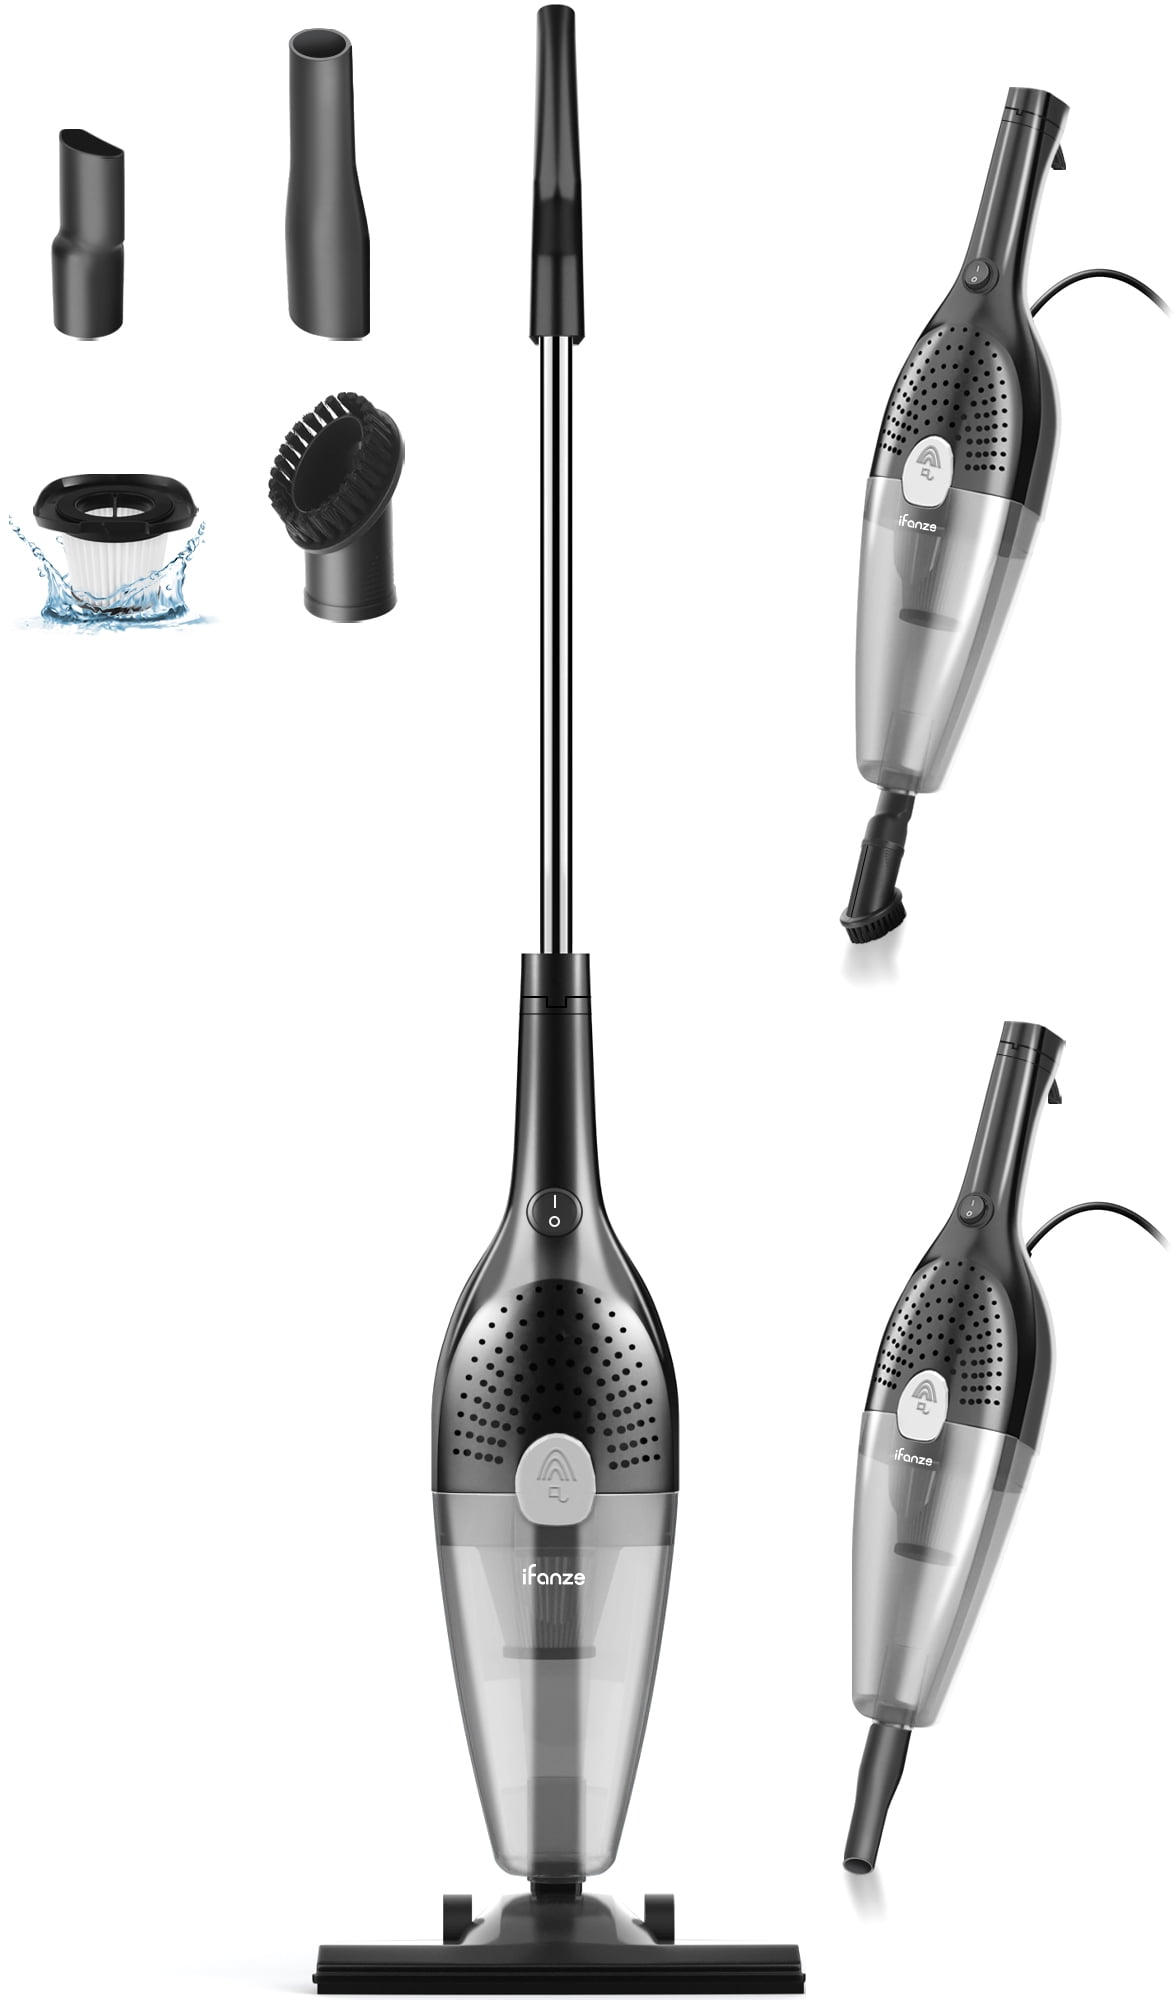 Fichaiy Corded Stick Vacuum Cleaner, Lightweight 3-in-1 Small Vacuums, 600W  Powerful Suction Handheld Vac Electric Brooms for Hardwood Floor Pet Hair